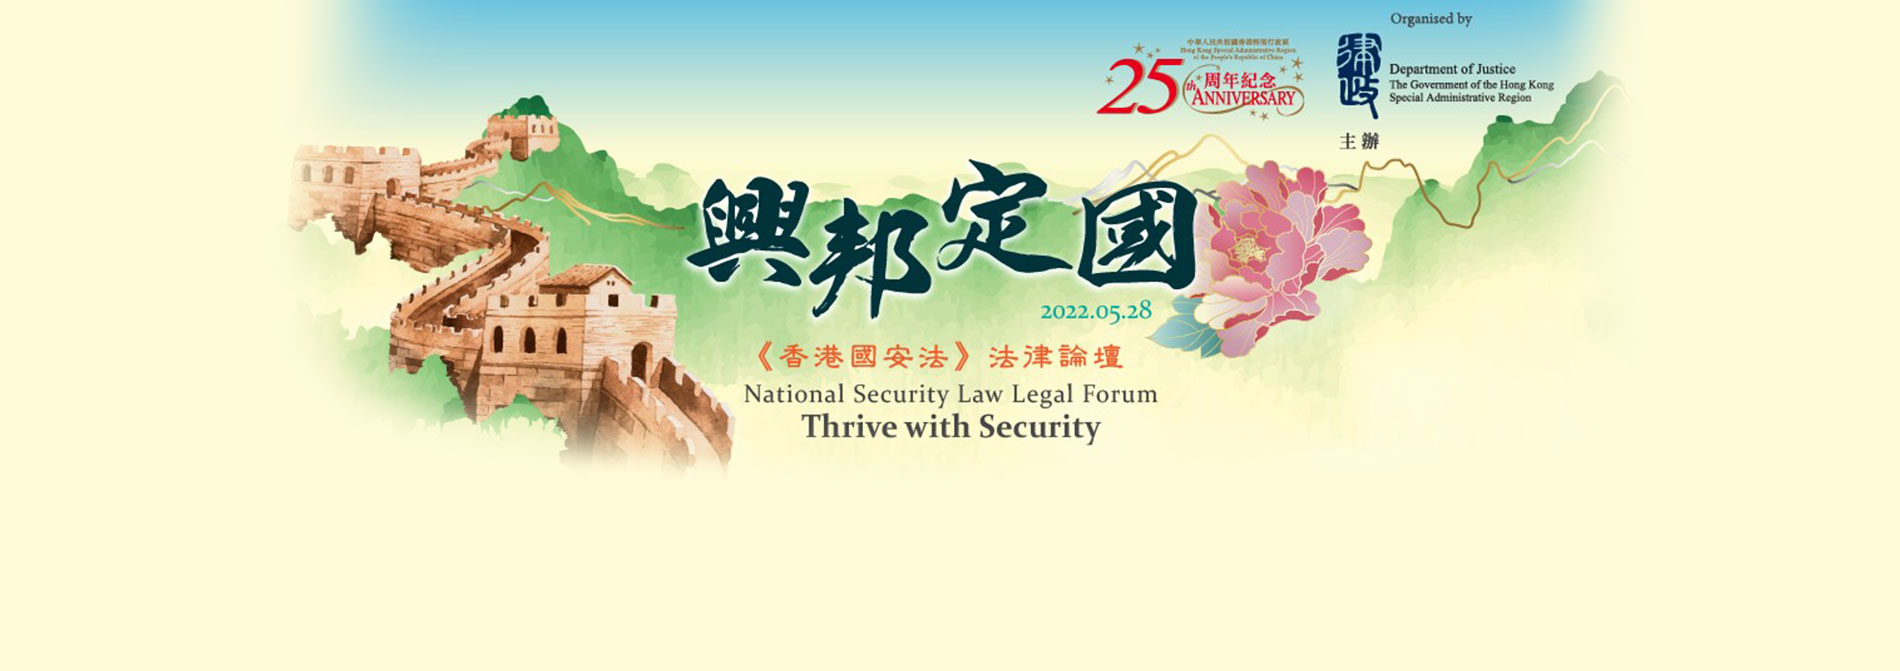 National Security Law Legal Forum - Thrive with Security